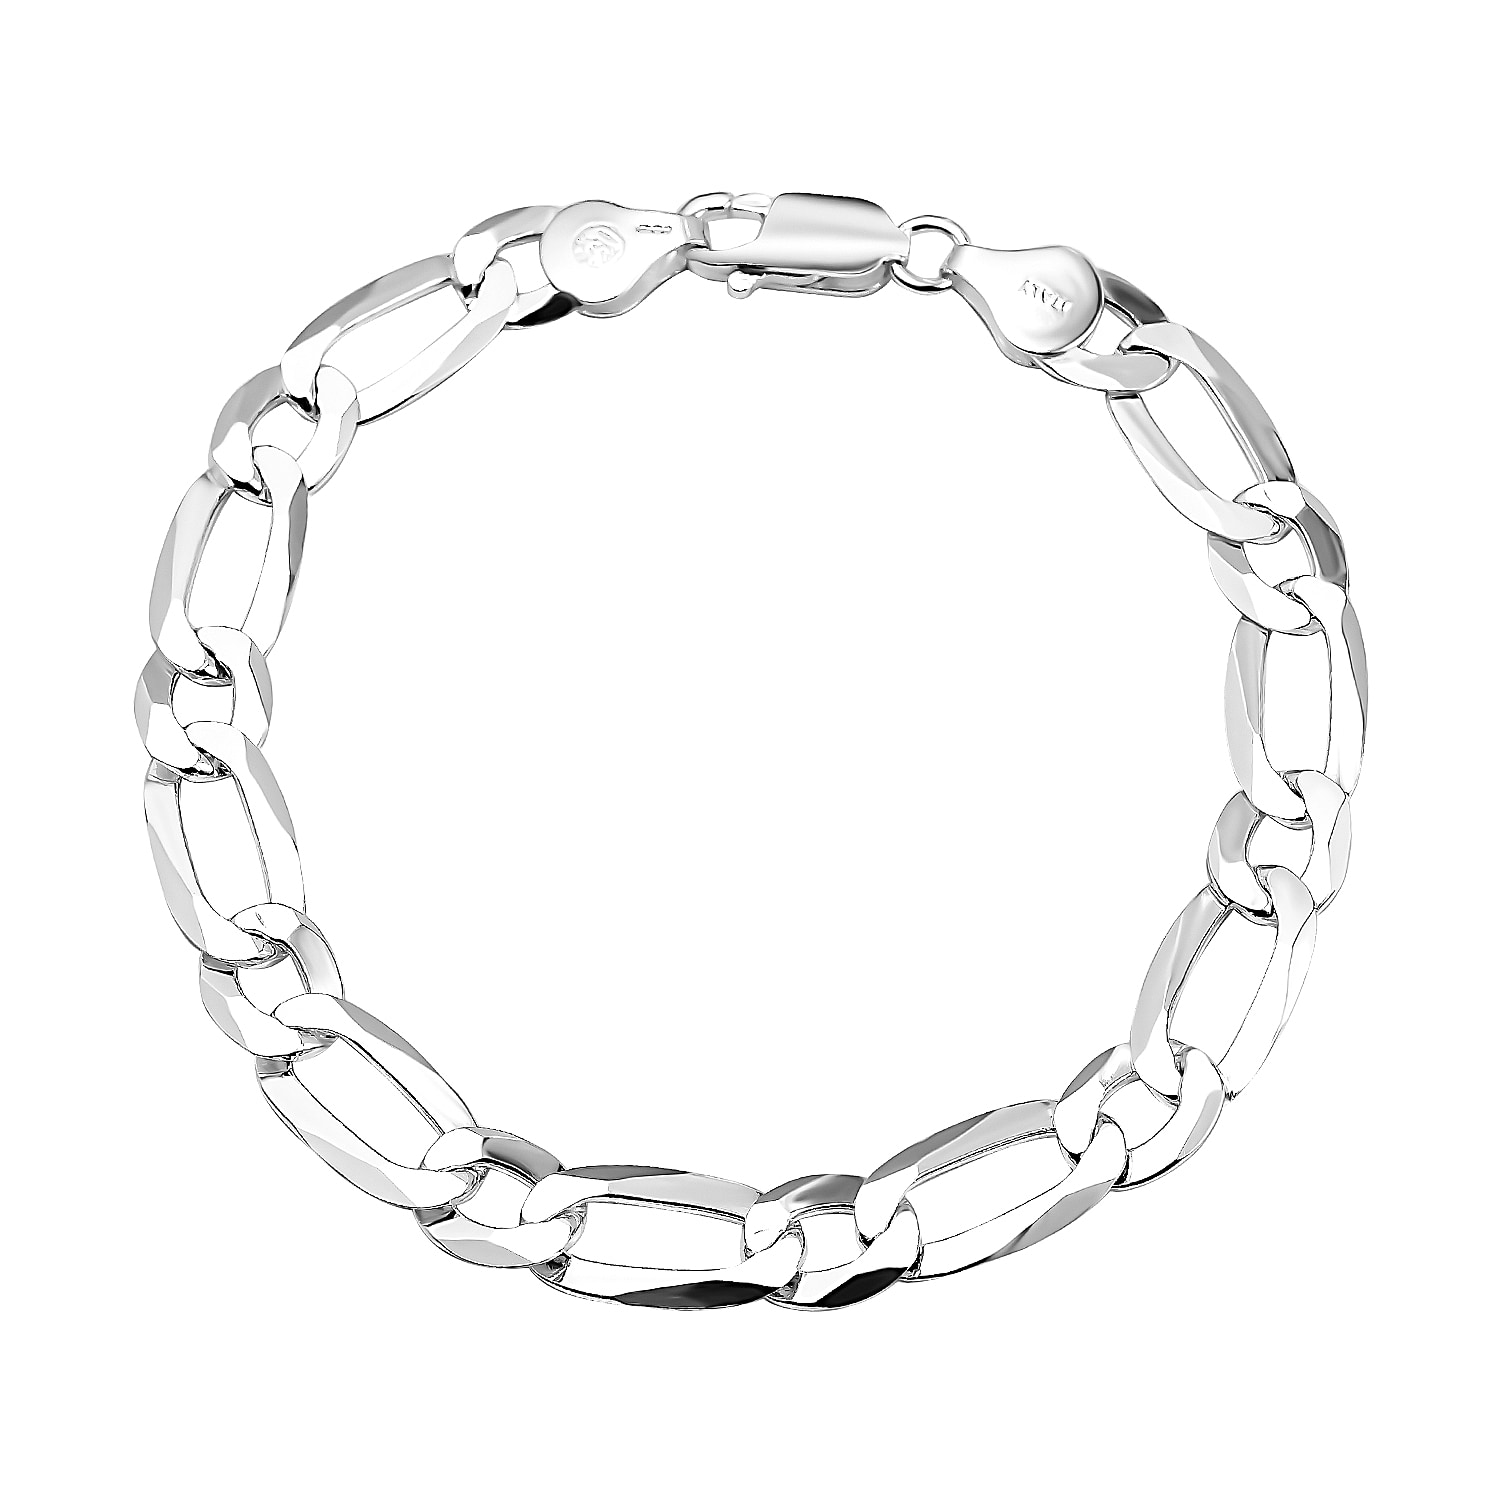 Vicenza Closeout - Rhodium Overlay Sterling Silver Figaro Bracelet (Size - 7.5), Silver Wt. 9.08 Gms